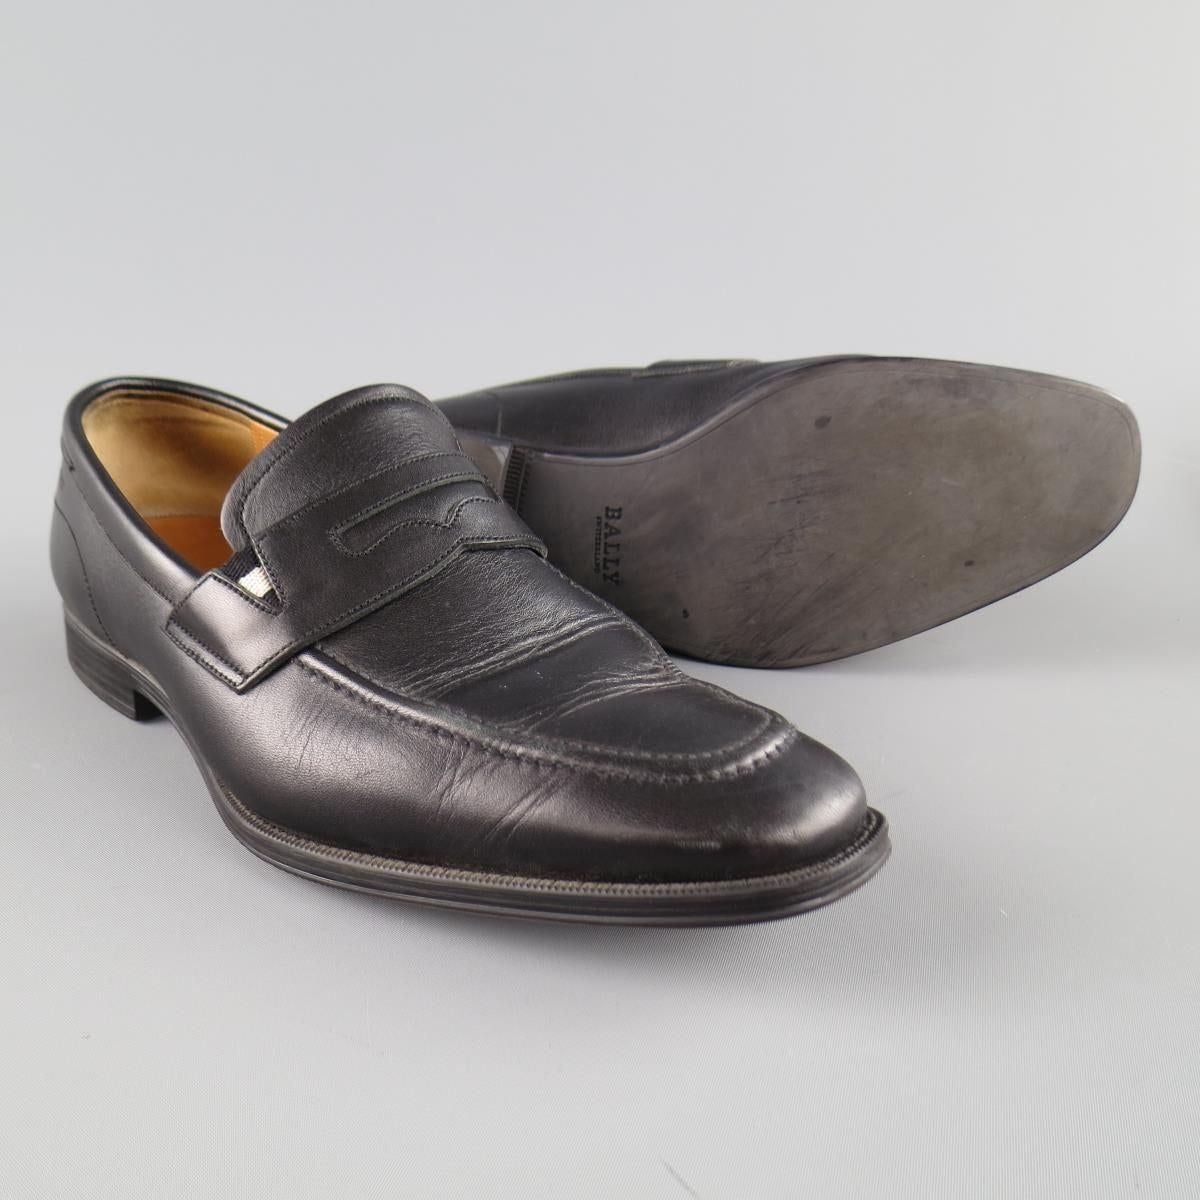 BALLY Size 7.5 Black Leather Penny Loafers In Excellent Condition For Sale In San Francisco, CA